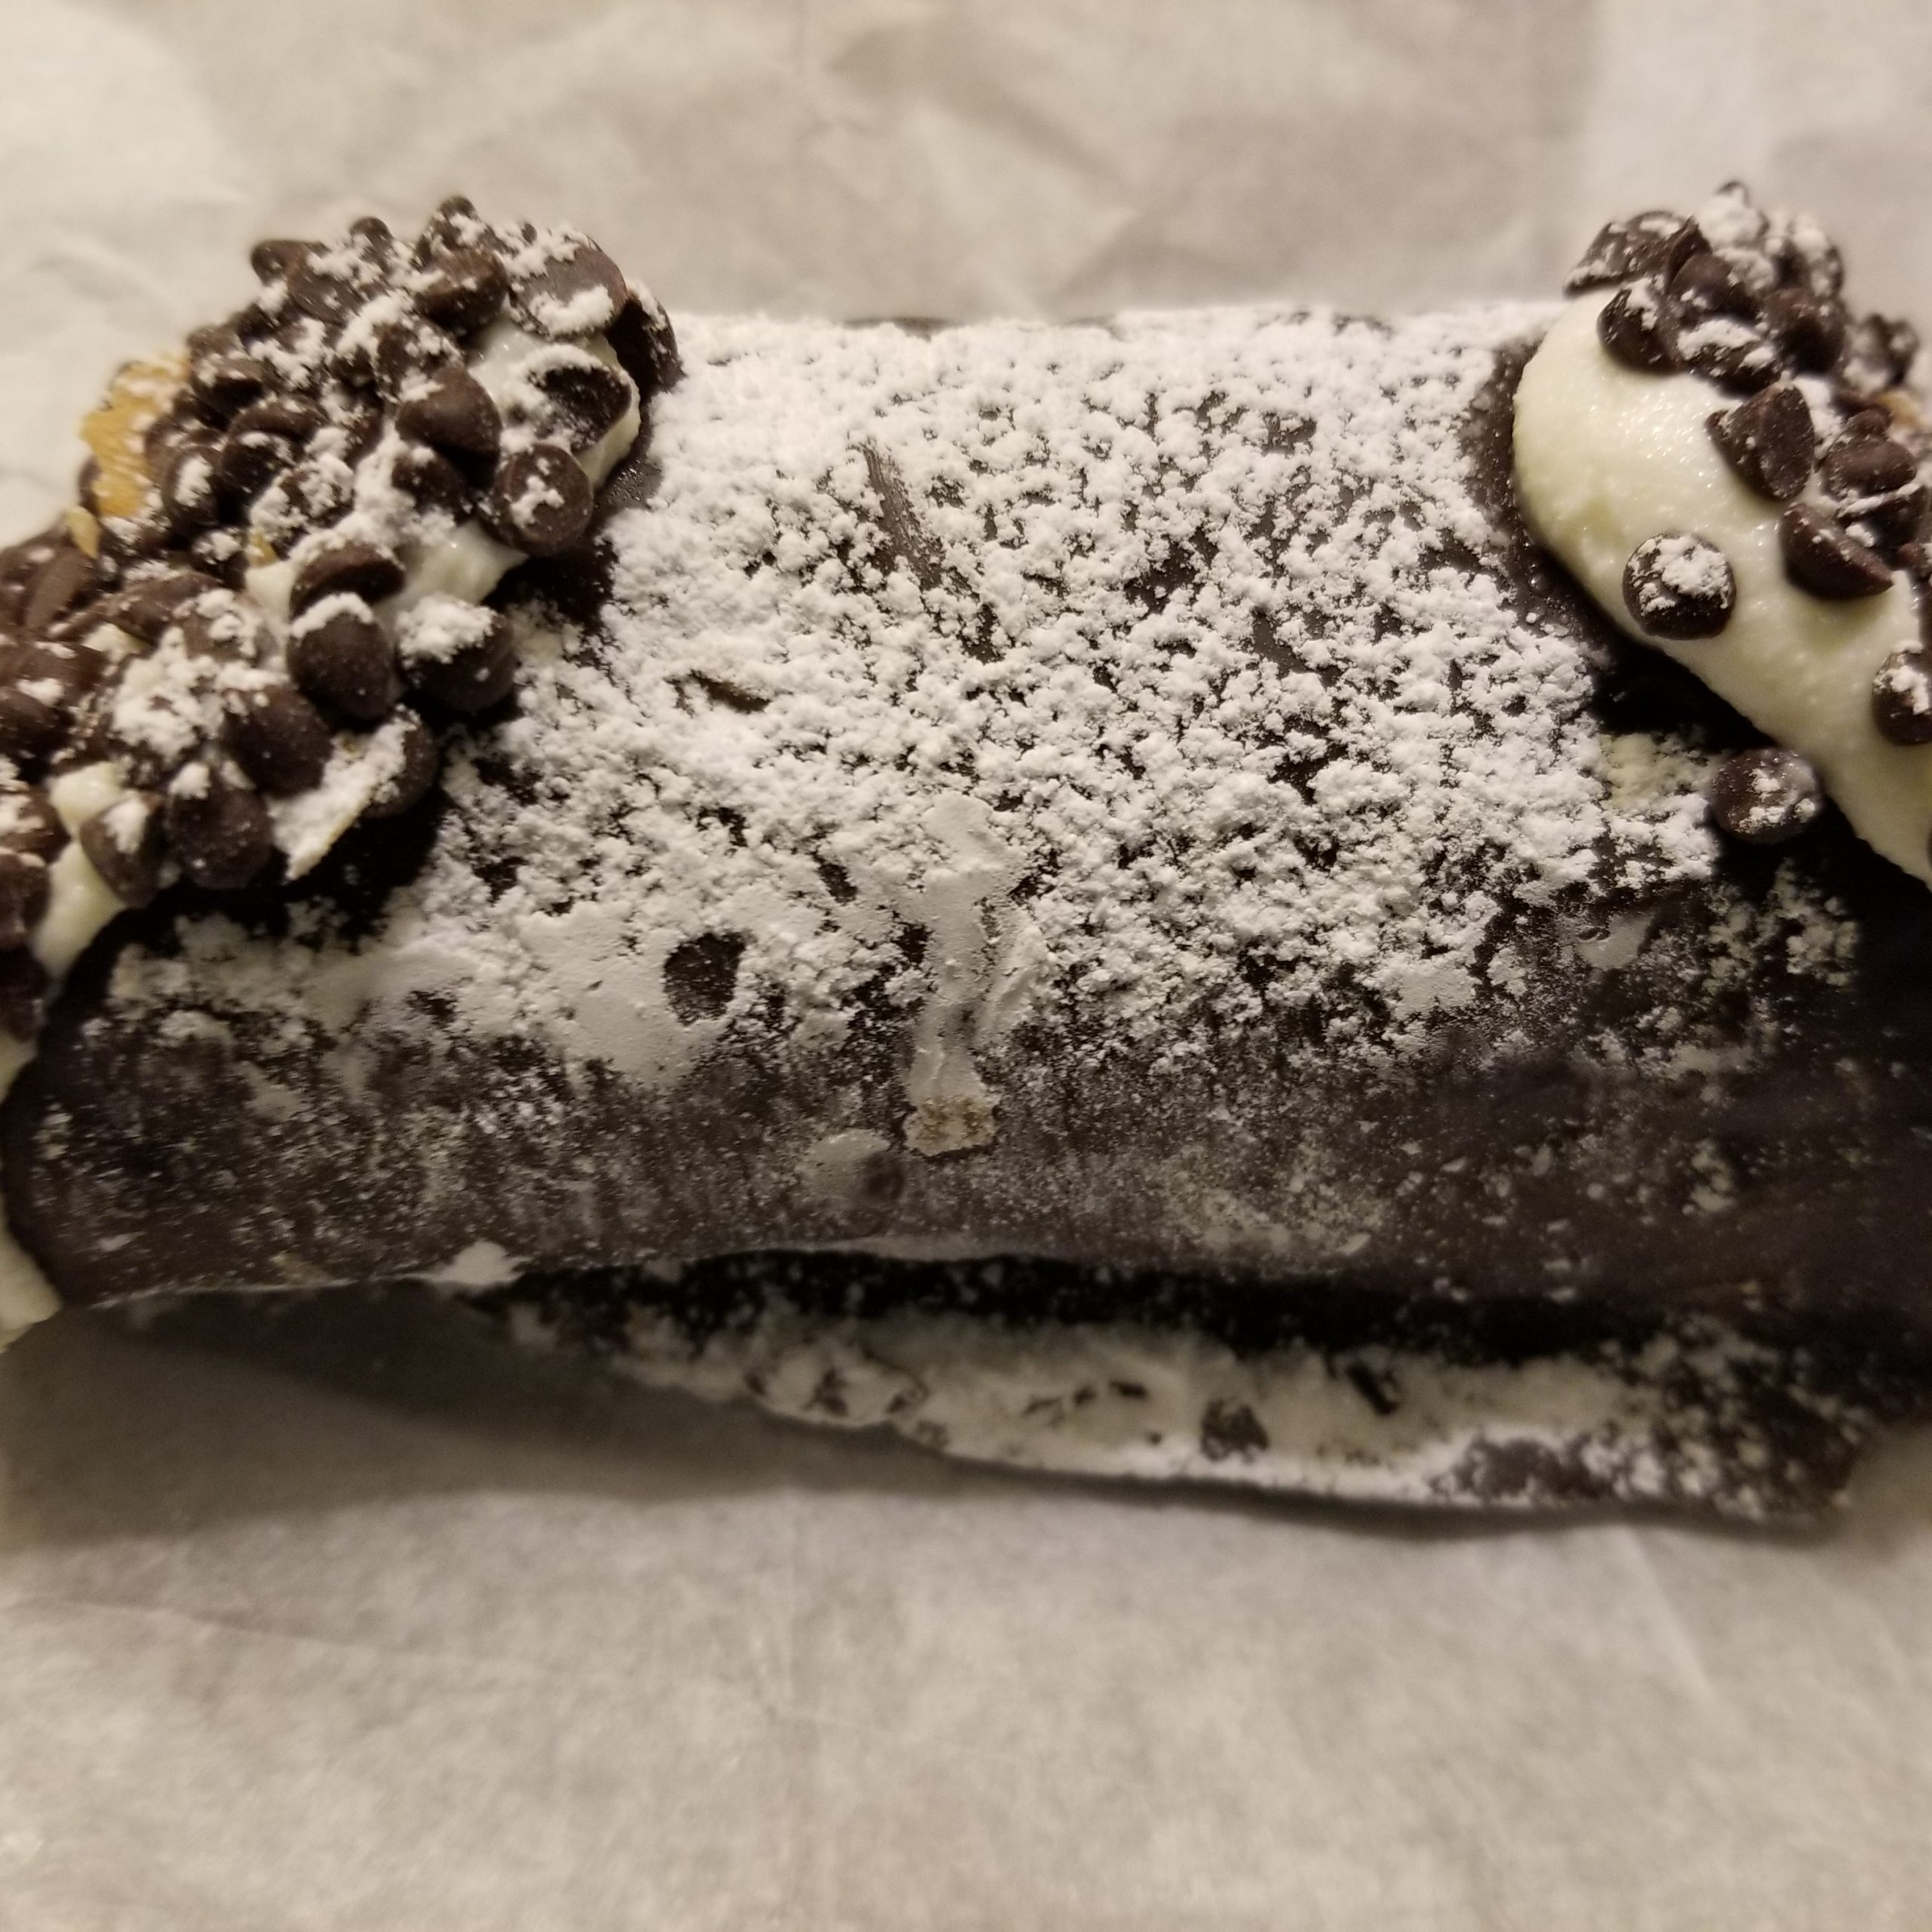 Chocolate covered Cannoli from Mike's Pastry in Boston, MA.